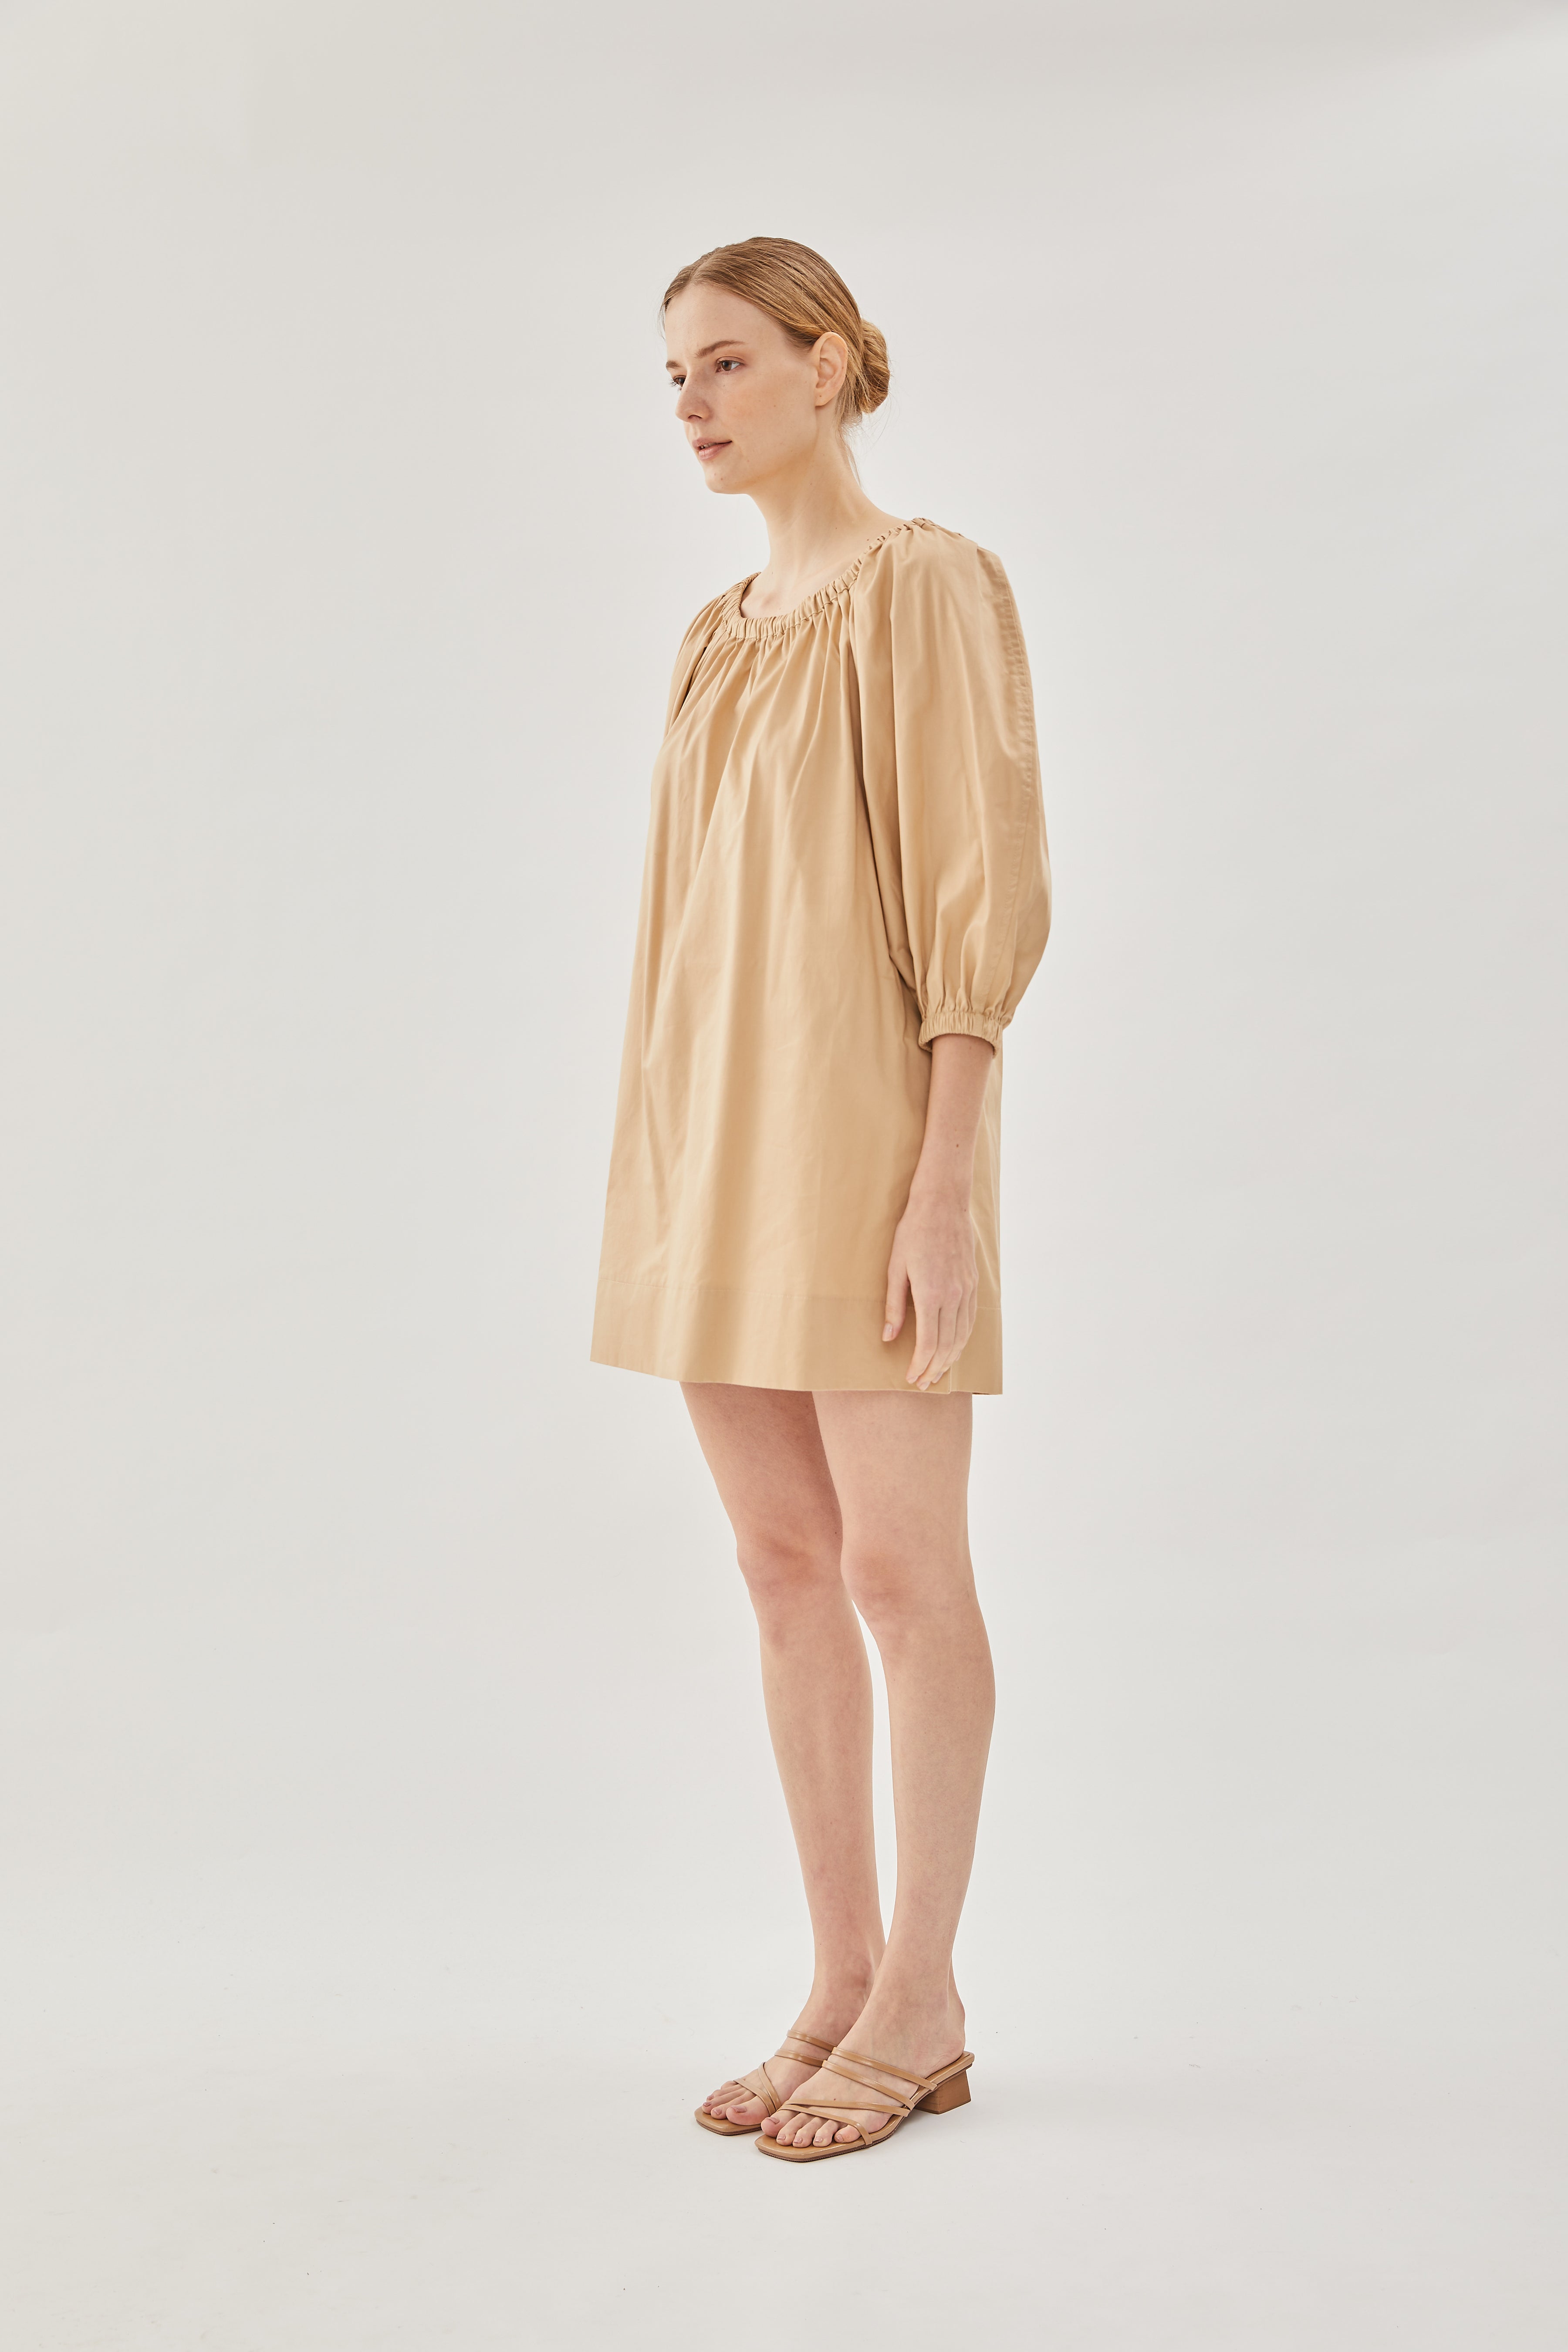 Cotton Gathered Dress in Sand